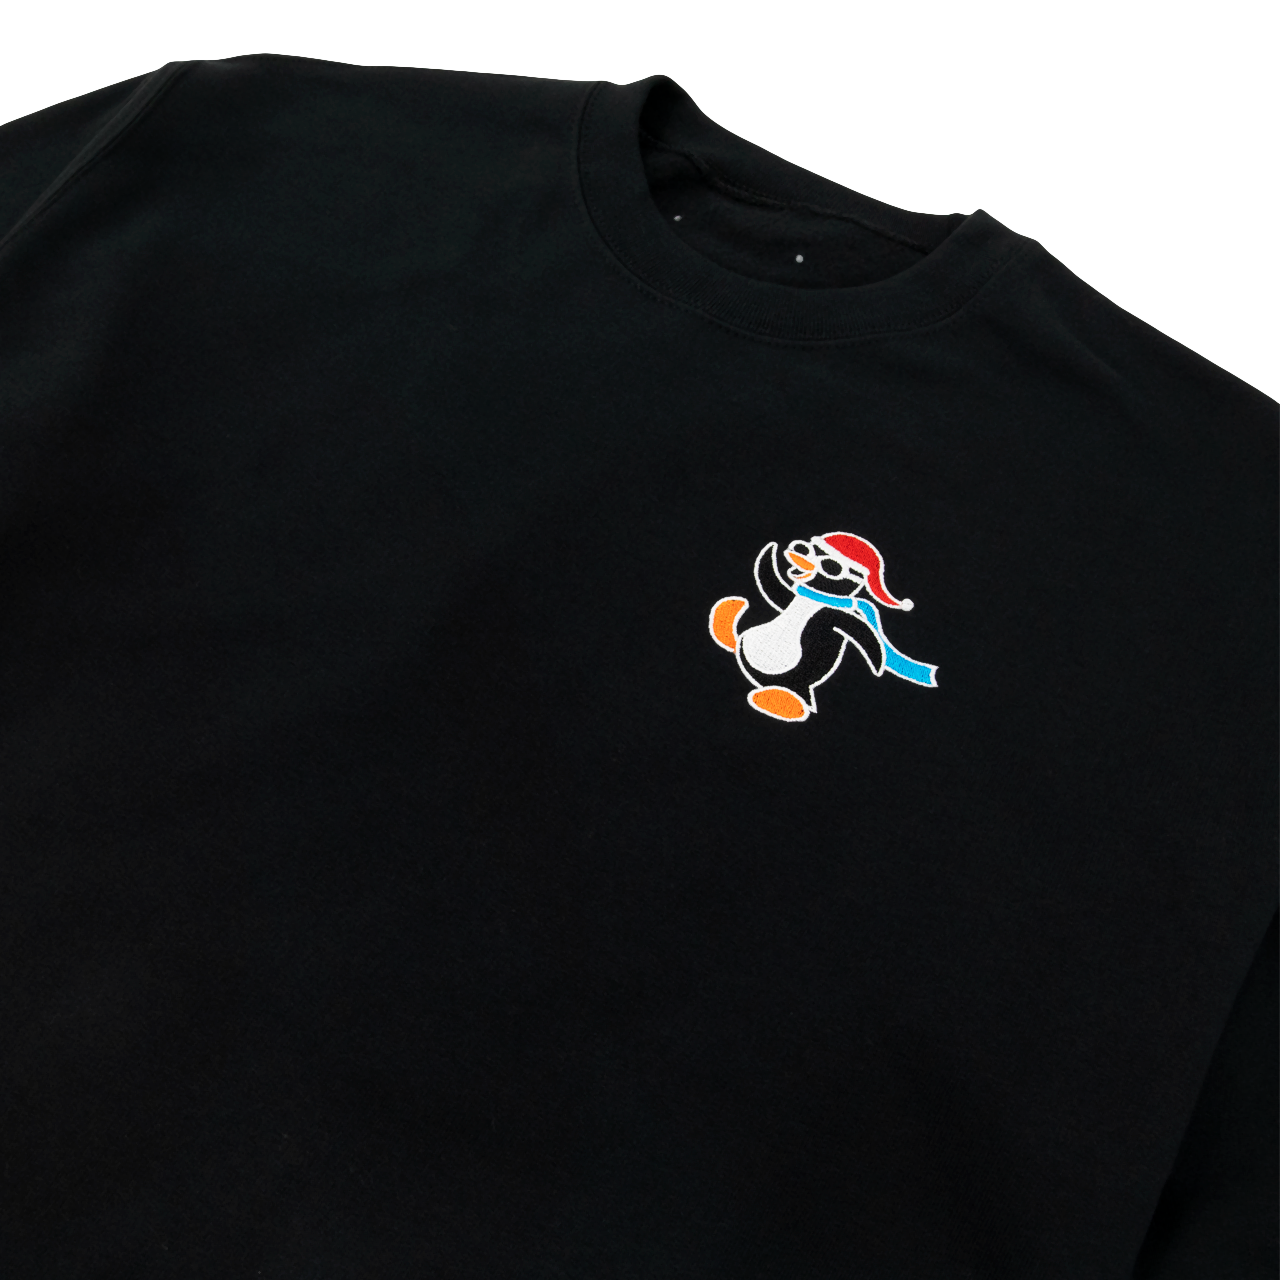 BFCM George Embroidered Limited Edition Holiday Penguin Sweatshirt